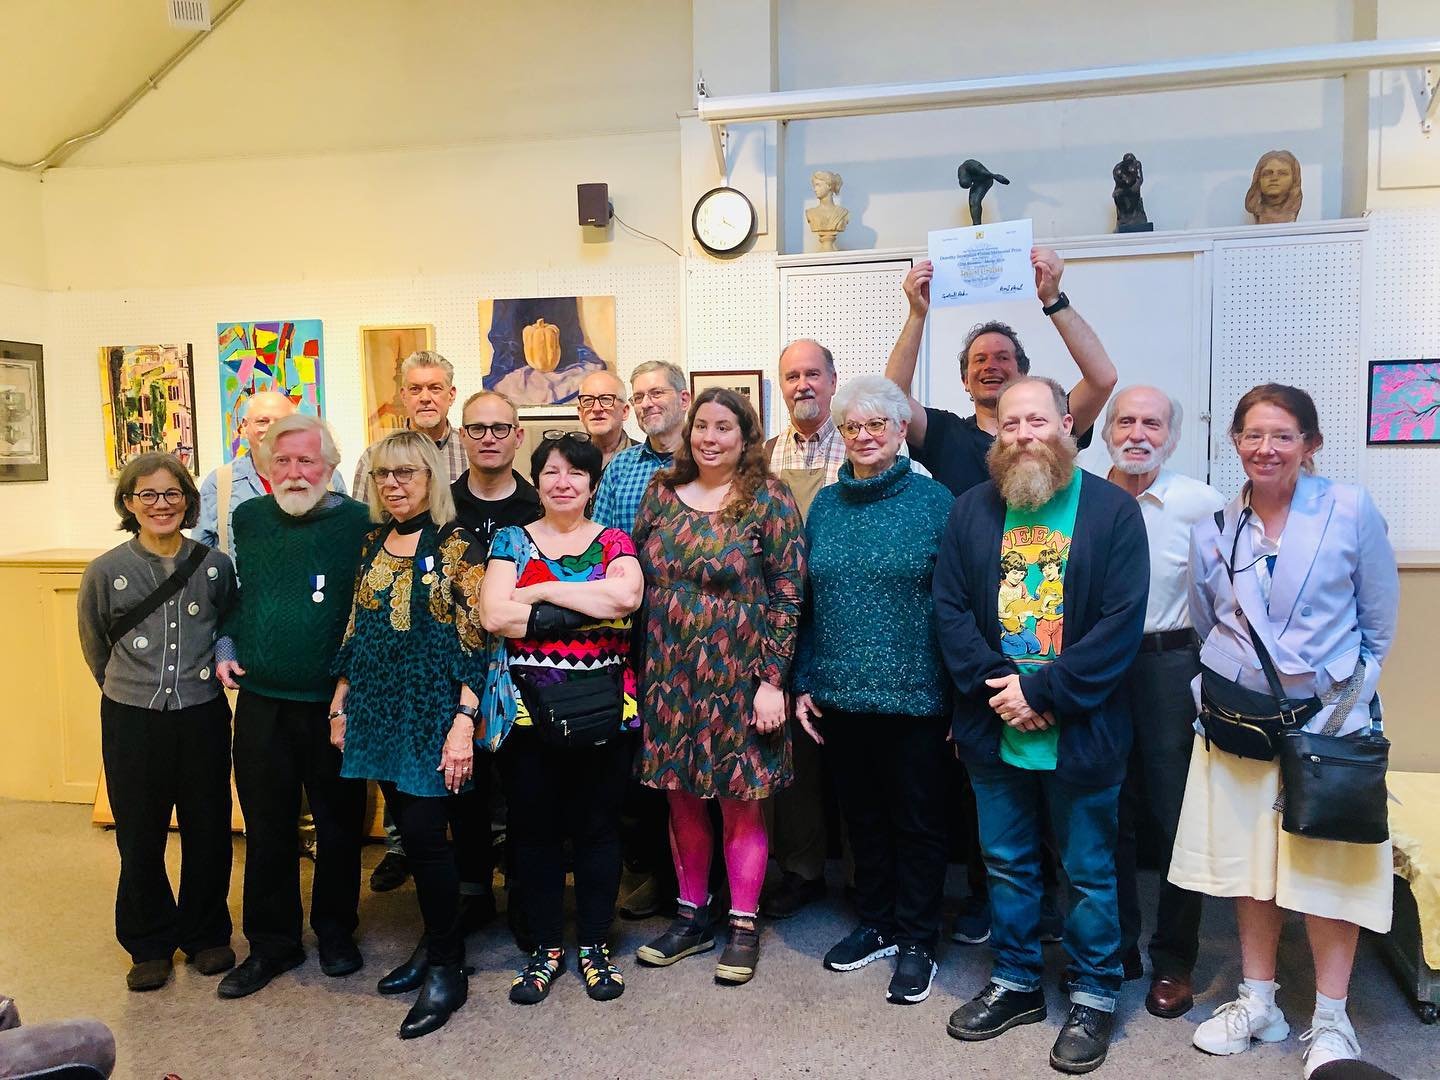 What an amazing afternoon! Congratulations to all who joined in today&rsquo;s festivities for the 110th Members Medal Show, prize juried by Tom Judd.🏆✨

The award winners: 

* The Plastic Club Gold Medal - Regina Barthmaier

* The Plastic Club Silve